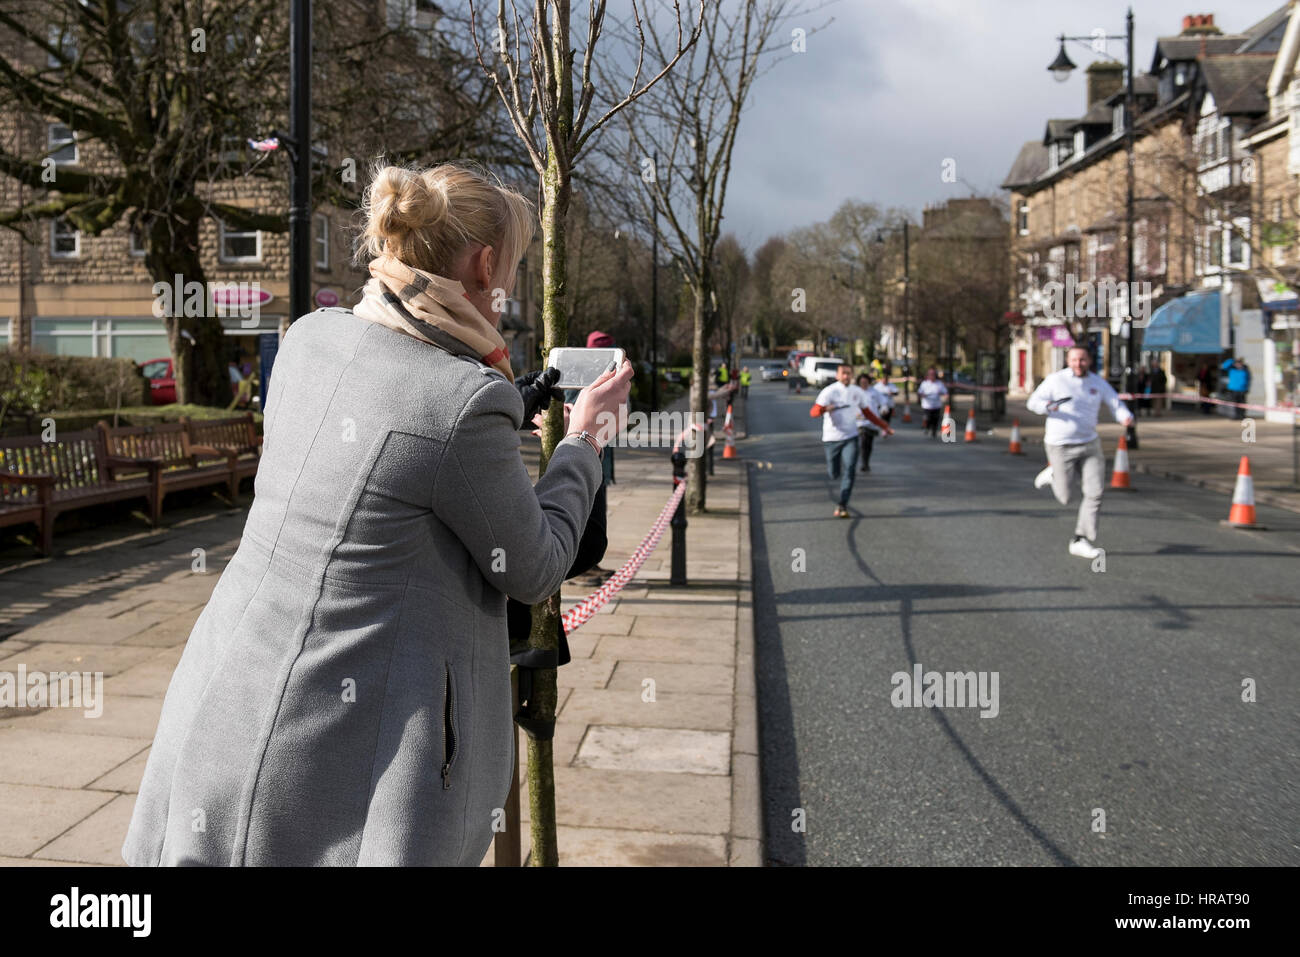 The Grove, Ilkley, West Yorkshire, England, UK. 28th Feb, 2017. A lady takes a photo of competitors running in the traditional, annual Ilkley Rotary Pancake Race on Shrove Tuesday. Credit: Ian Lamond/Alamy Live News Stock Photo